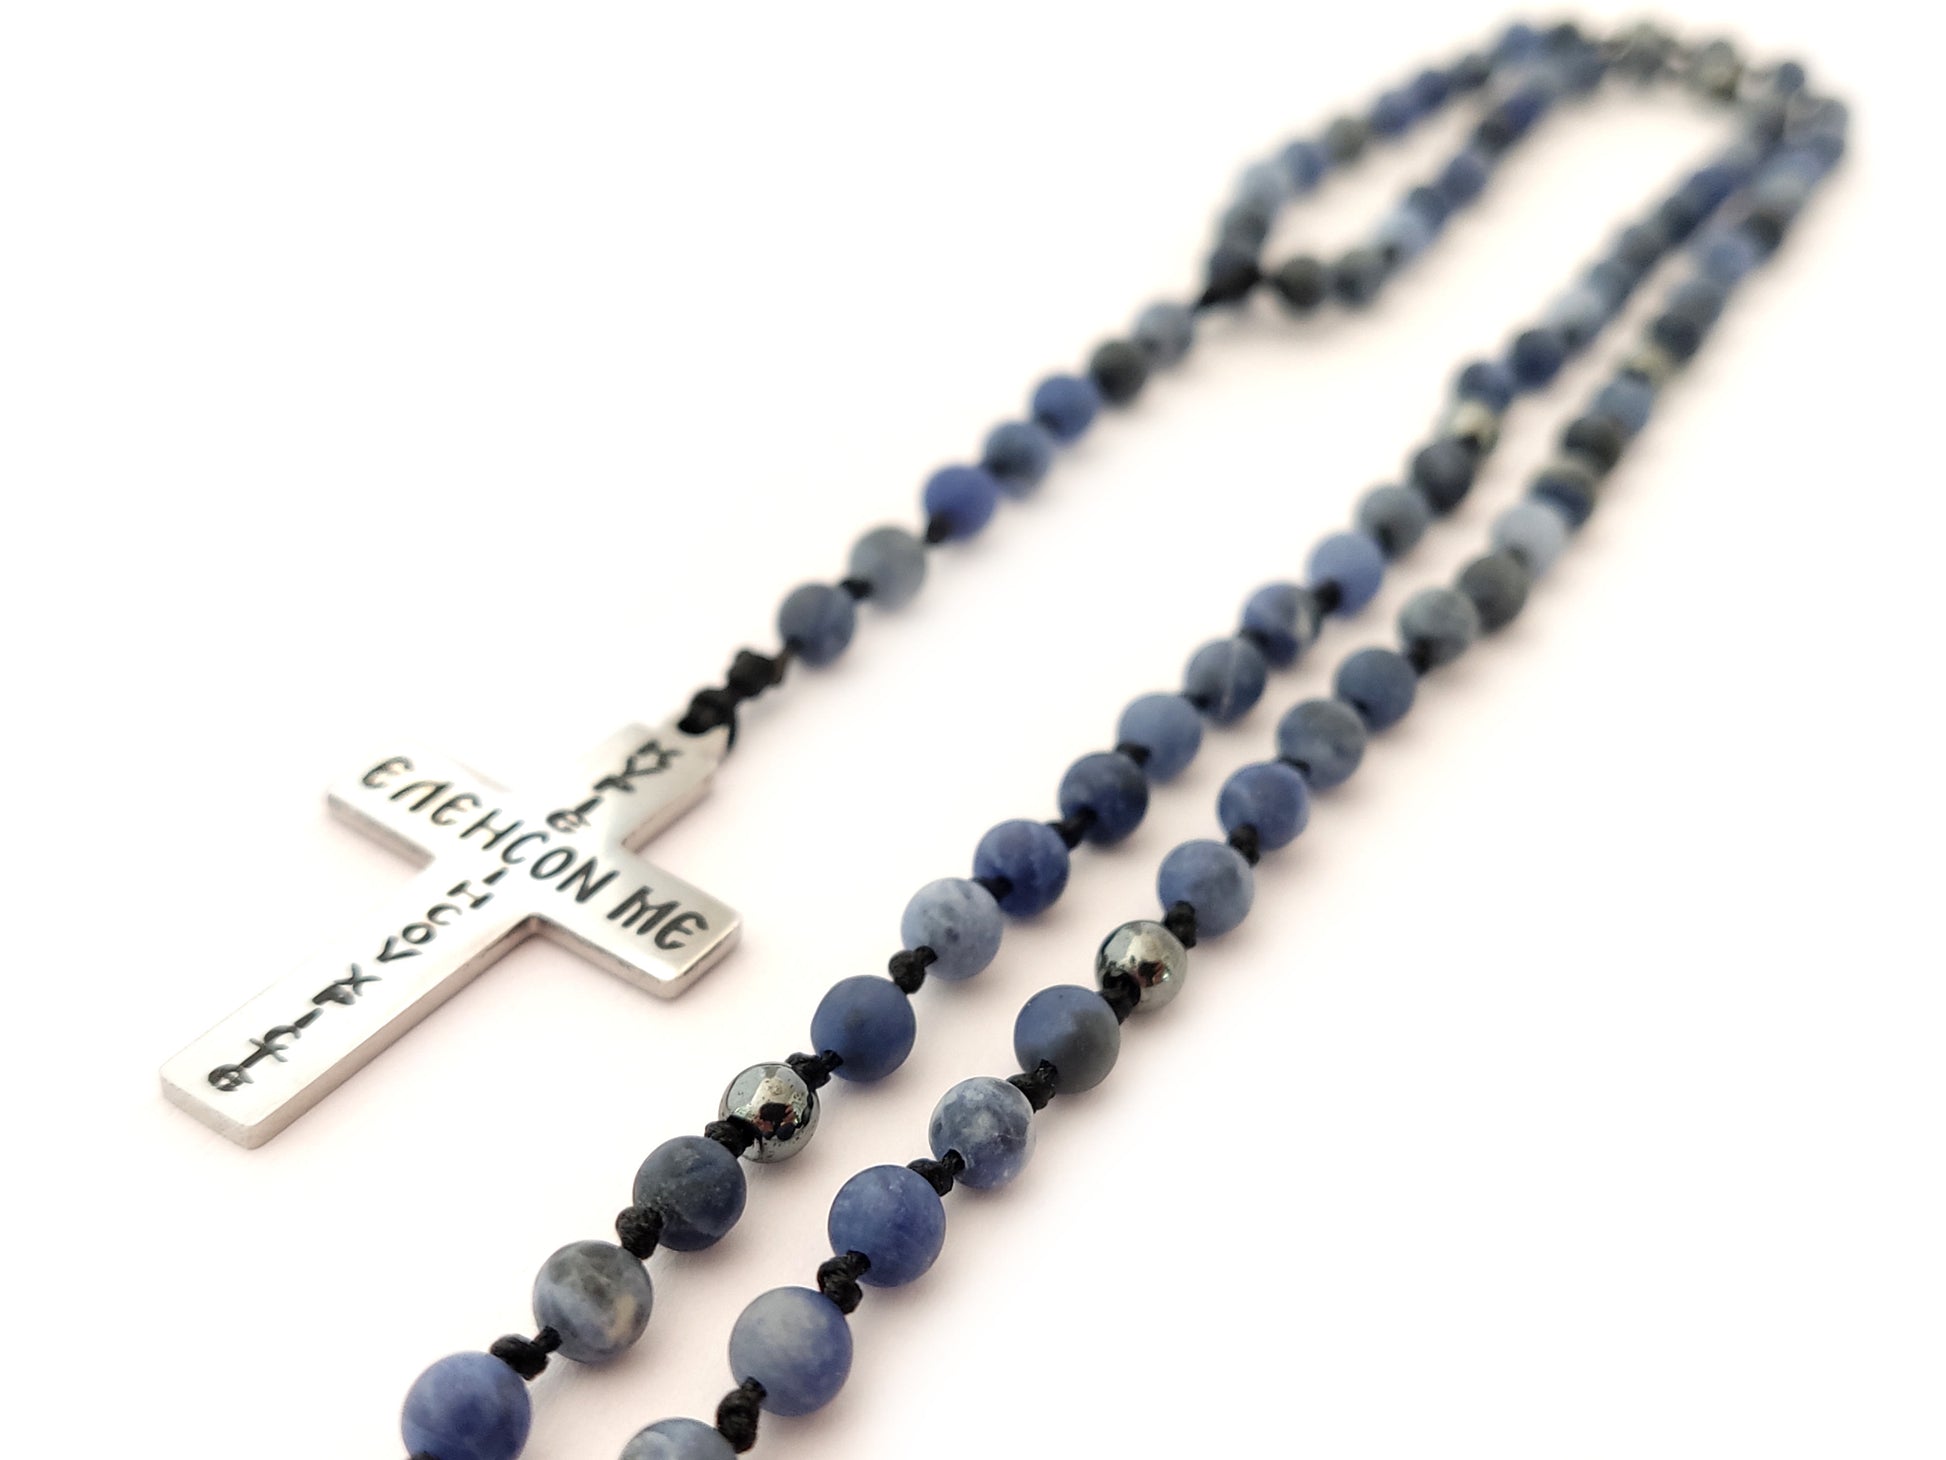 Handcrafted Greek Cross Necklace with Genuine Blue Sodalite Stones.